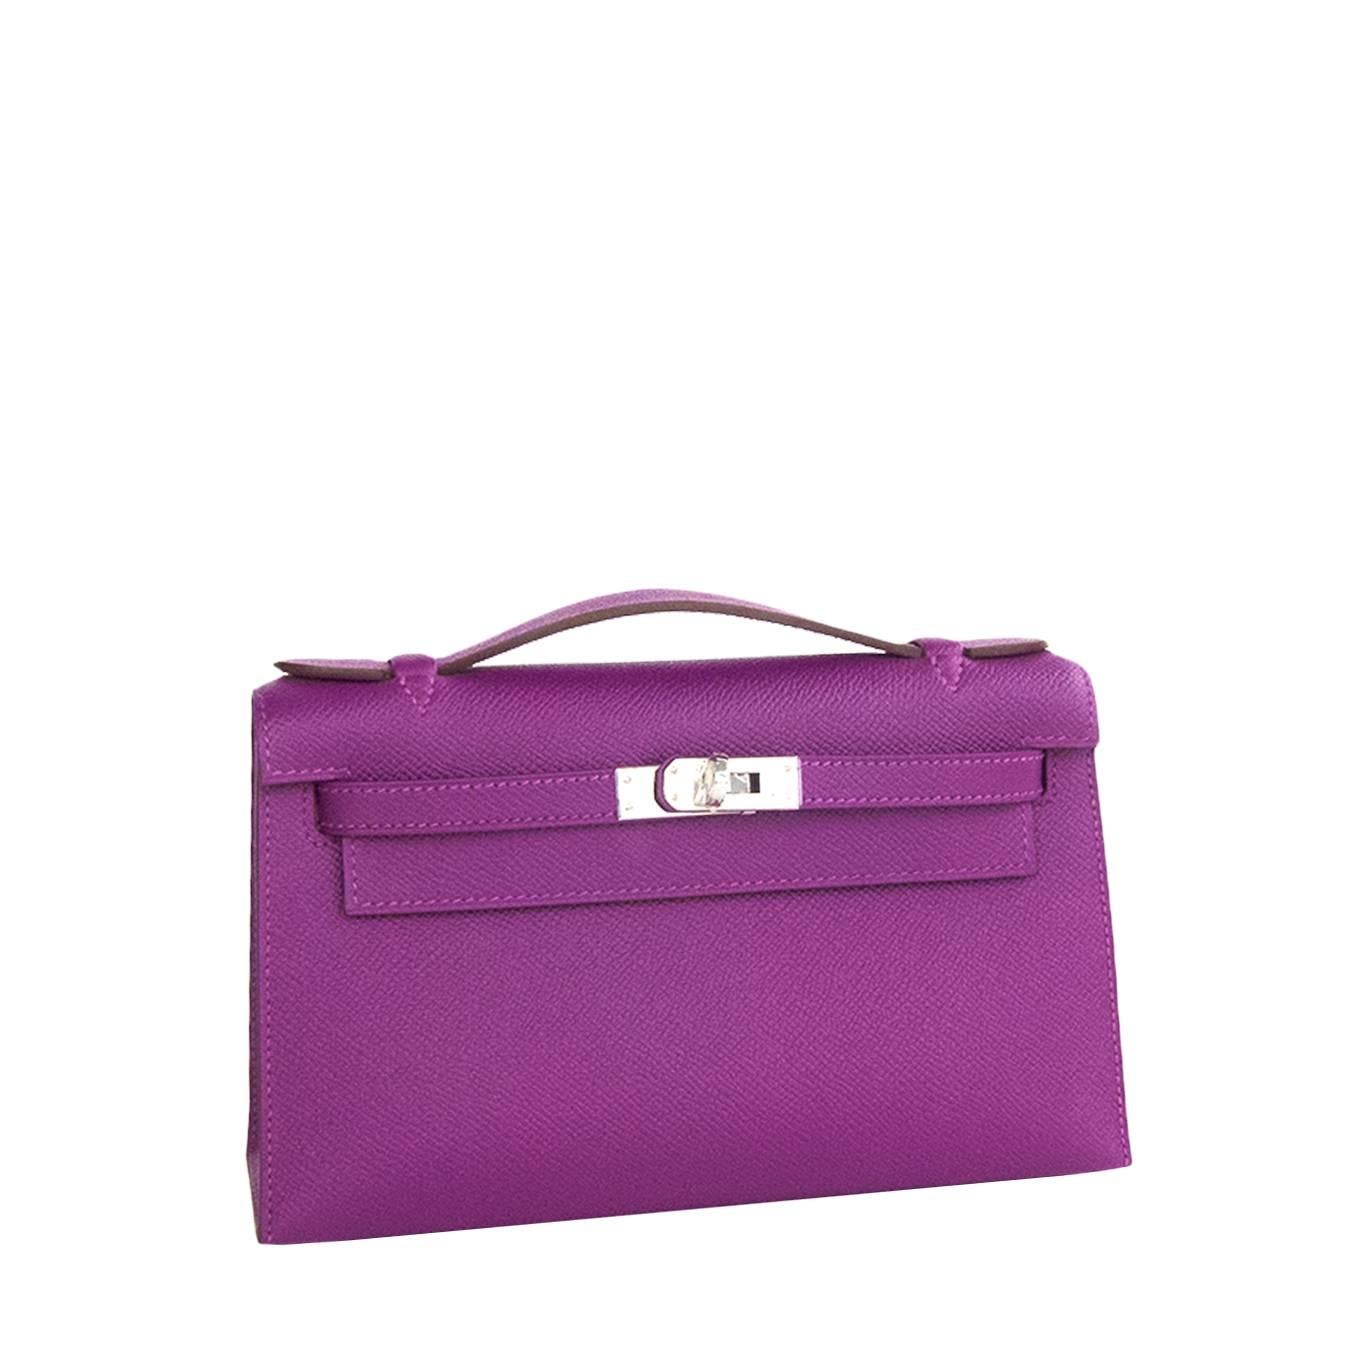 Hermes Anemone Epsom Kelly Pochette Bag Love

Perfect gift!  Brand New in Box
Coming full set with Hermes sleeper, box and ribbon
Beyond precious
Kelly Pochette is so very rare and especially so in cult favorite Anemone Epsom
The best purple